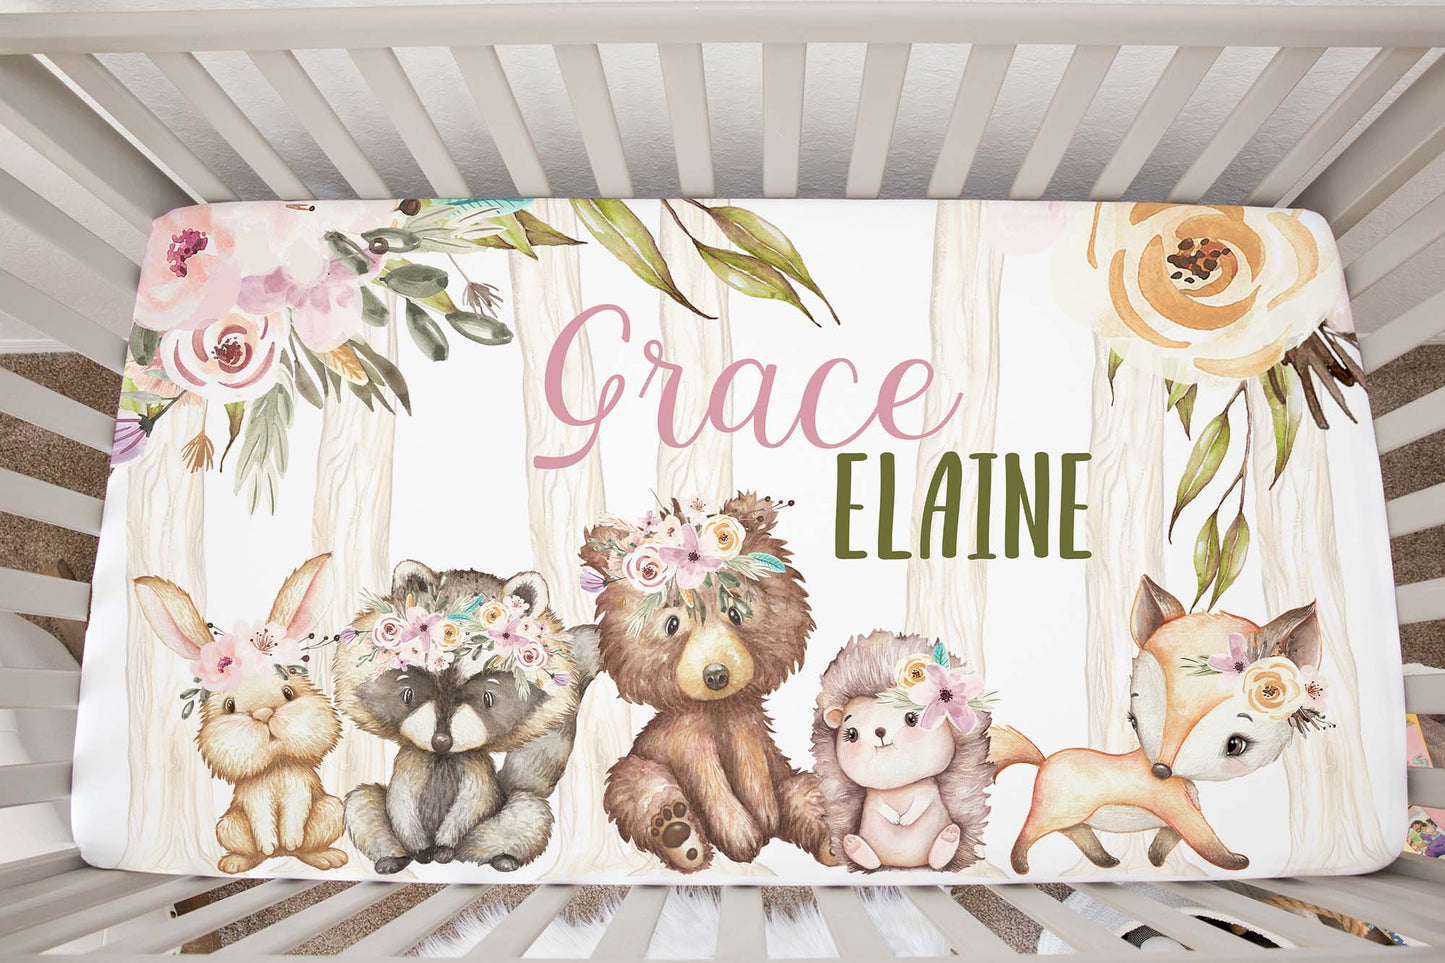 Woodland girl Personalized Crib Sheet, Forest Baby Girl Nursery Bedding - Forest Friends